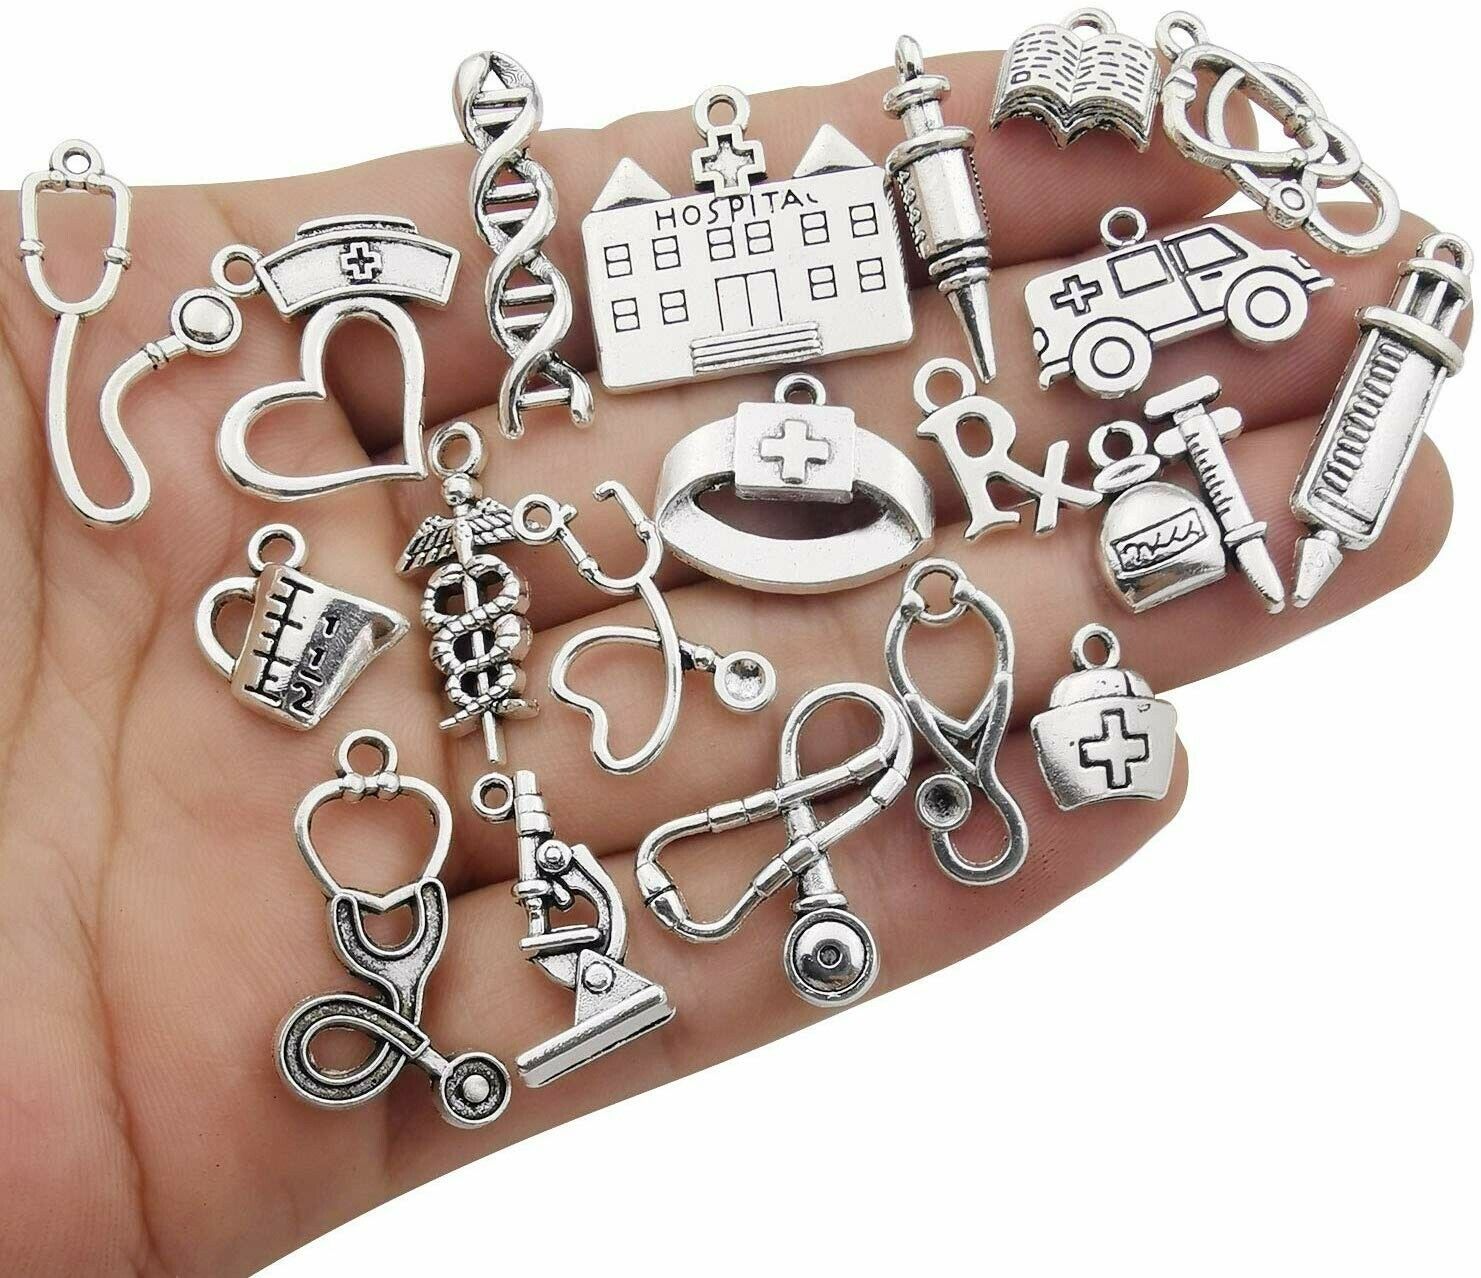 10 Nurse Charms Doctor Pendants Themed Antiqued Silver Assorted Medical Jewelry 